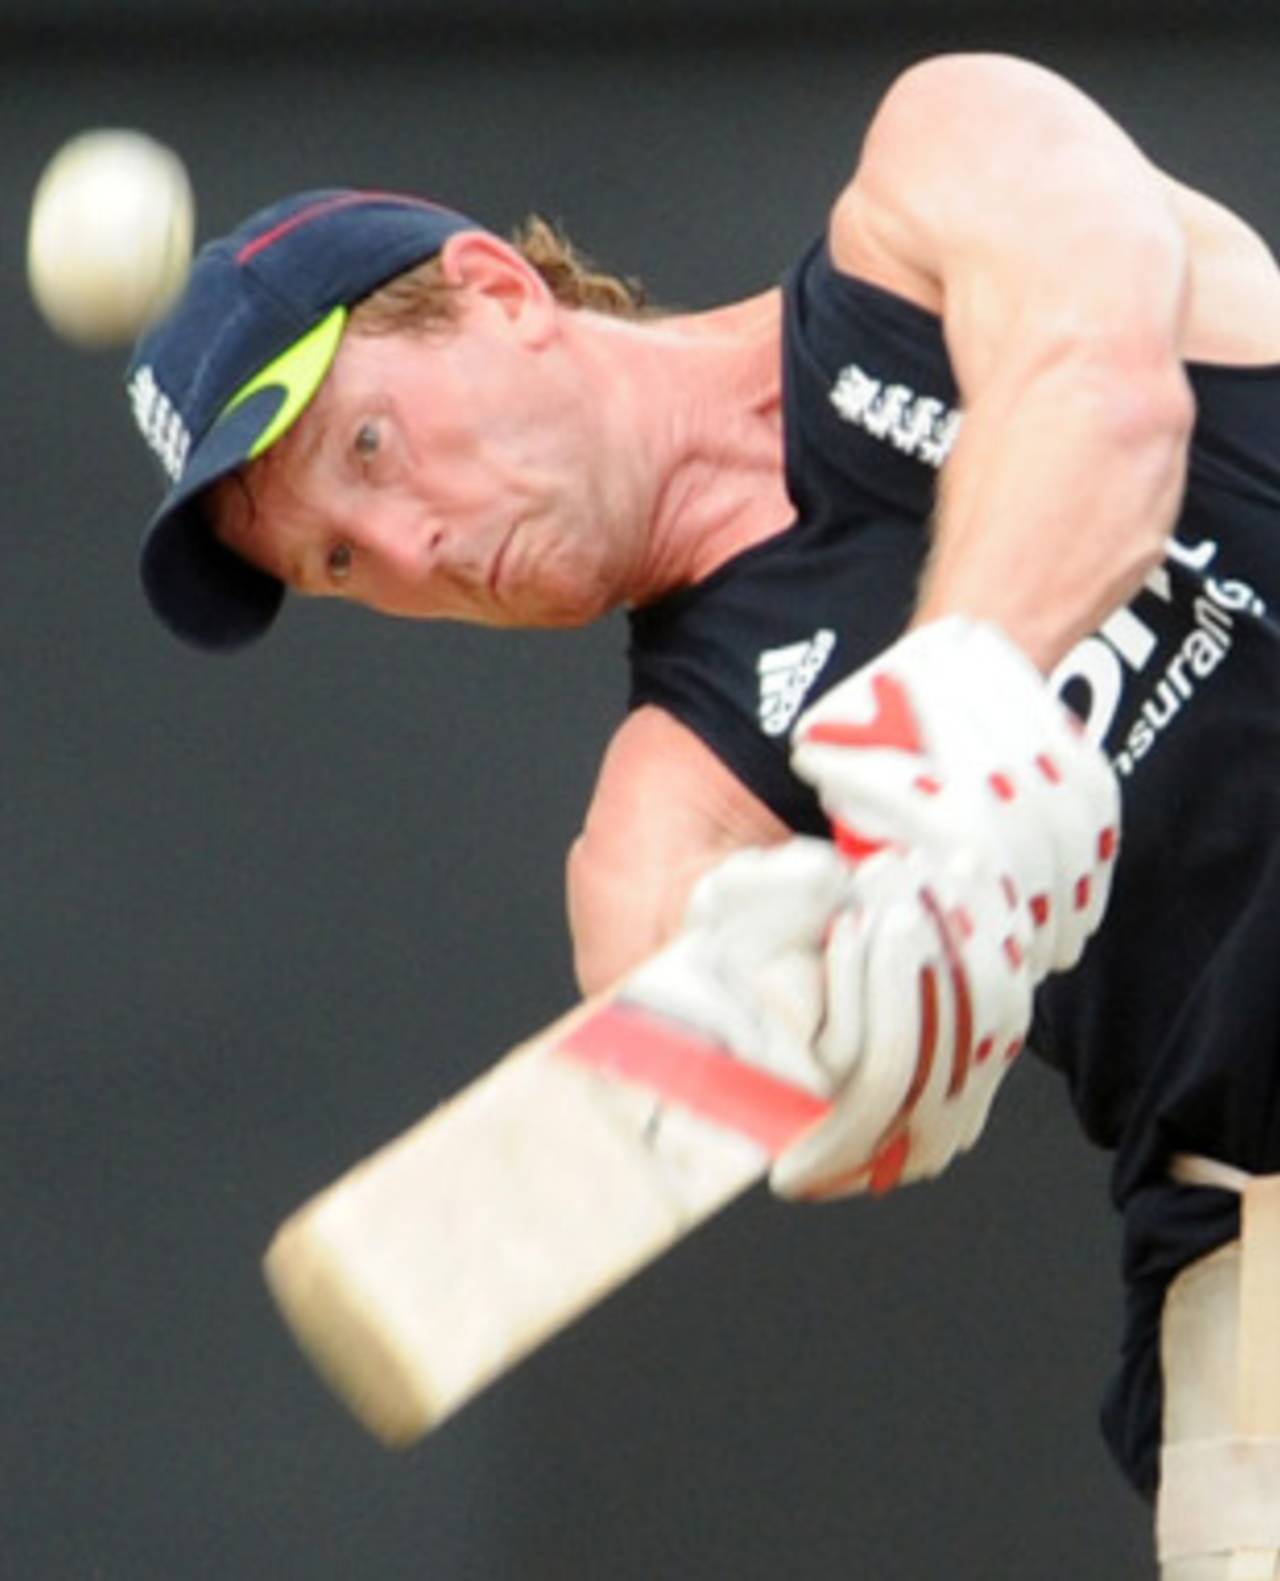 Paul Collingwood practices his six hitting ahead of England's semi-final clash, St Lucia, May 12, 2010